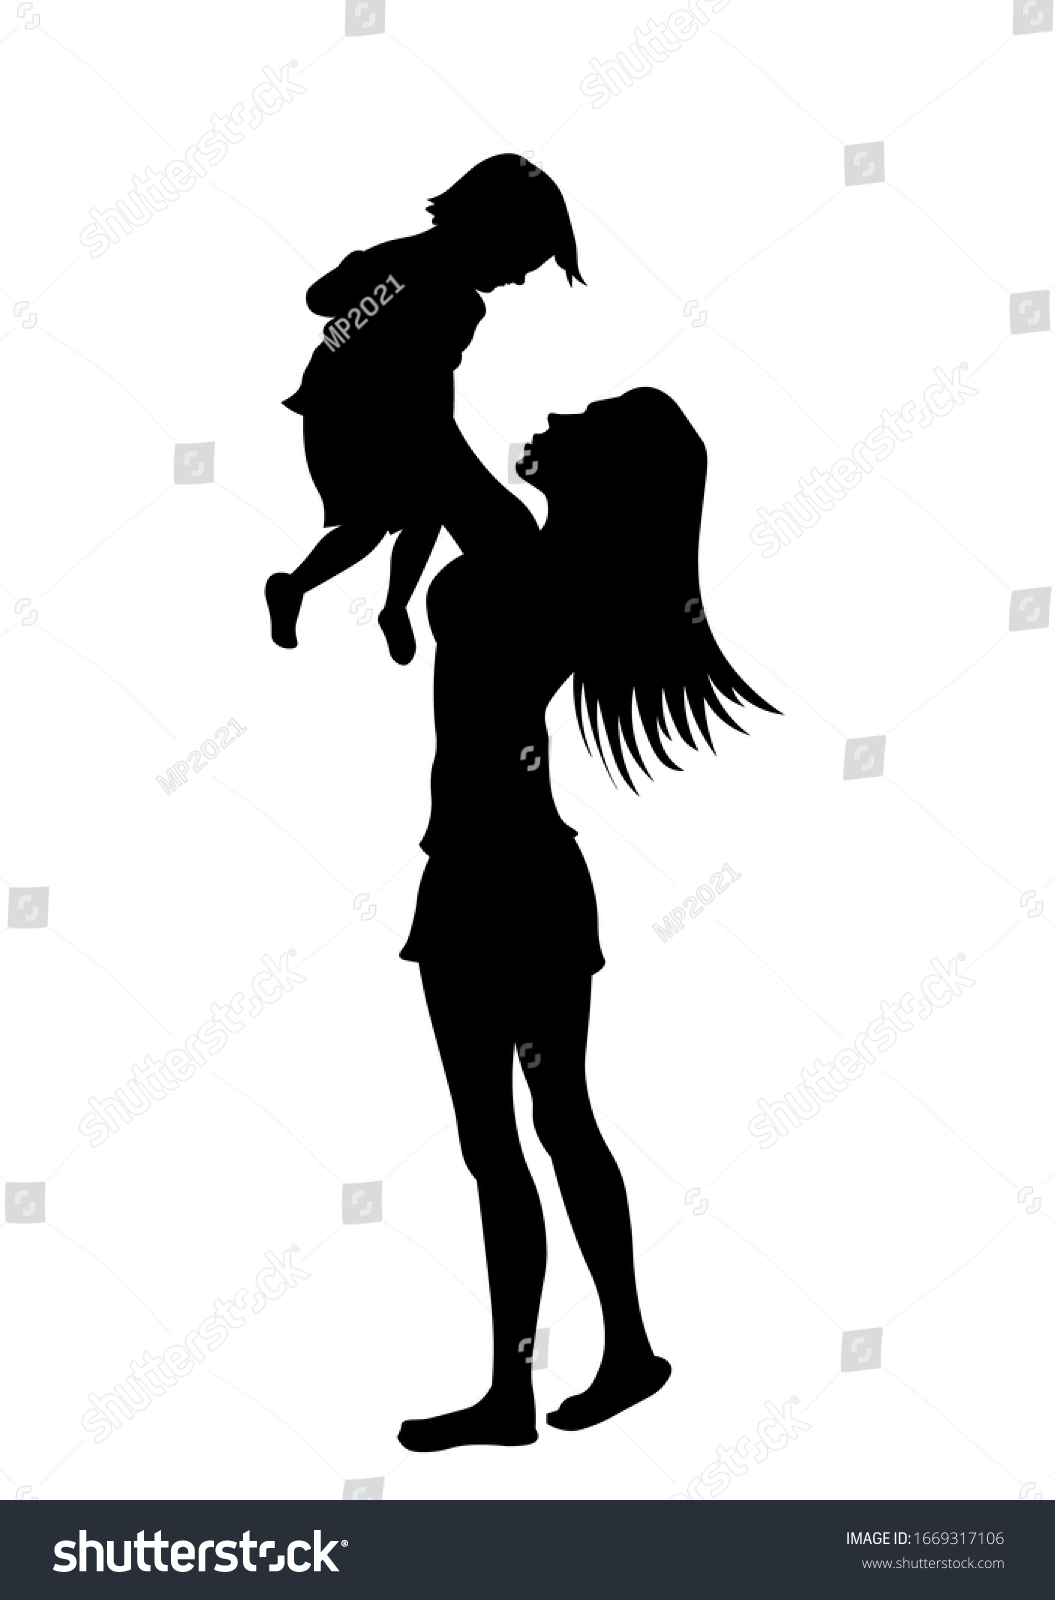 3,196 Mother lifting son Images, Stock Photos & Vectors | Shutterstock